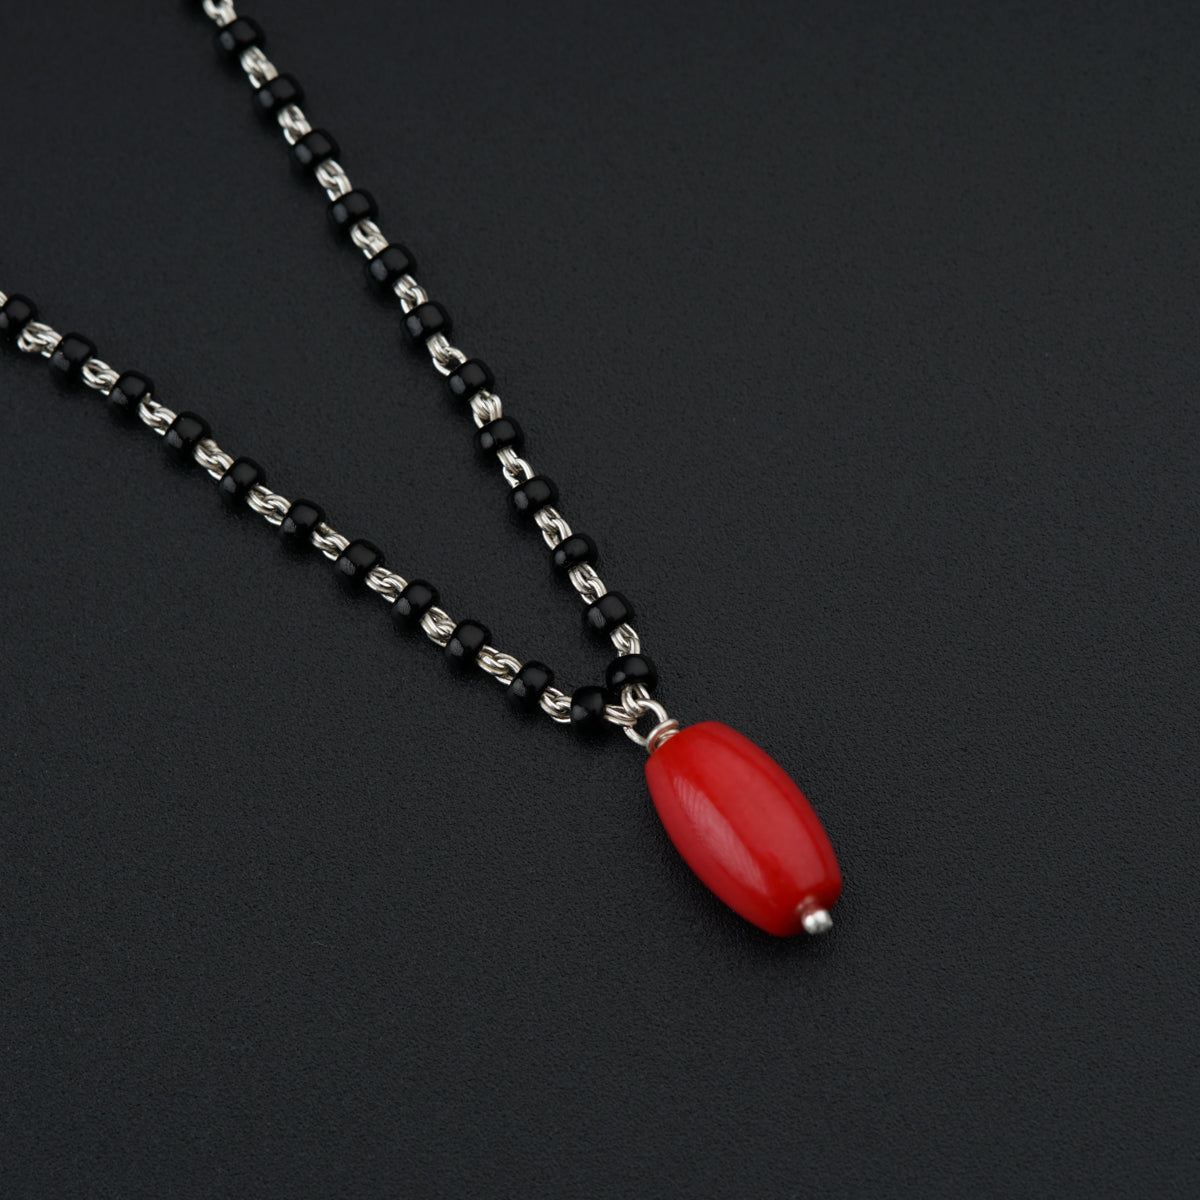 a necklace with a red pendant on a black background